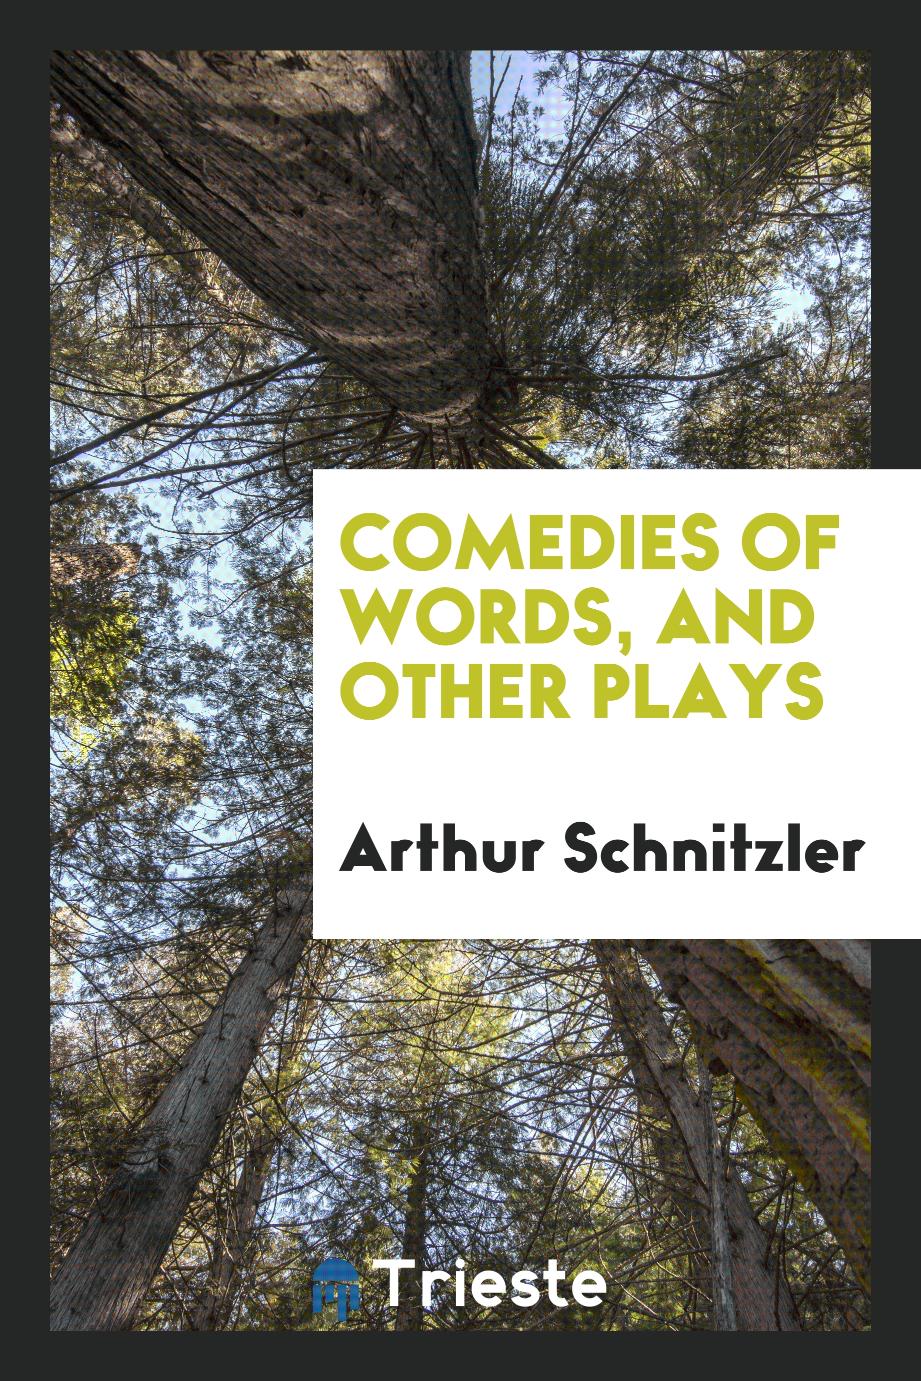 Comedies of words, and other plays